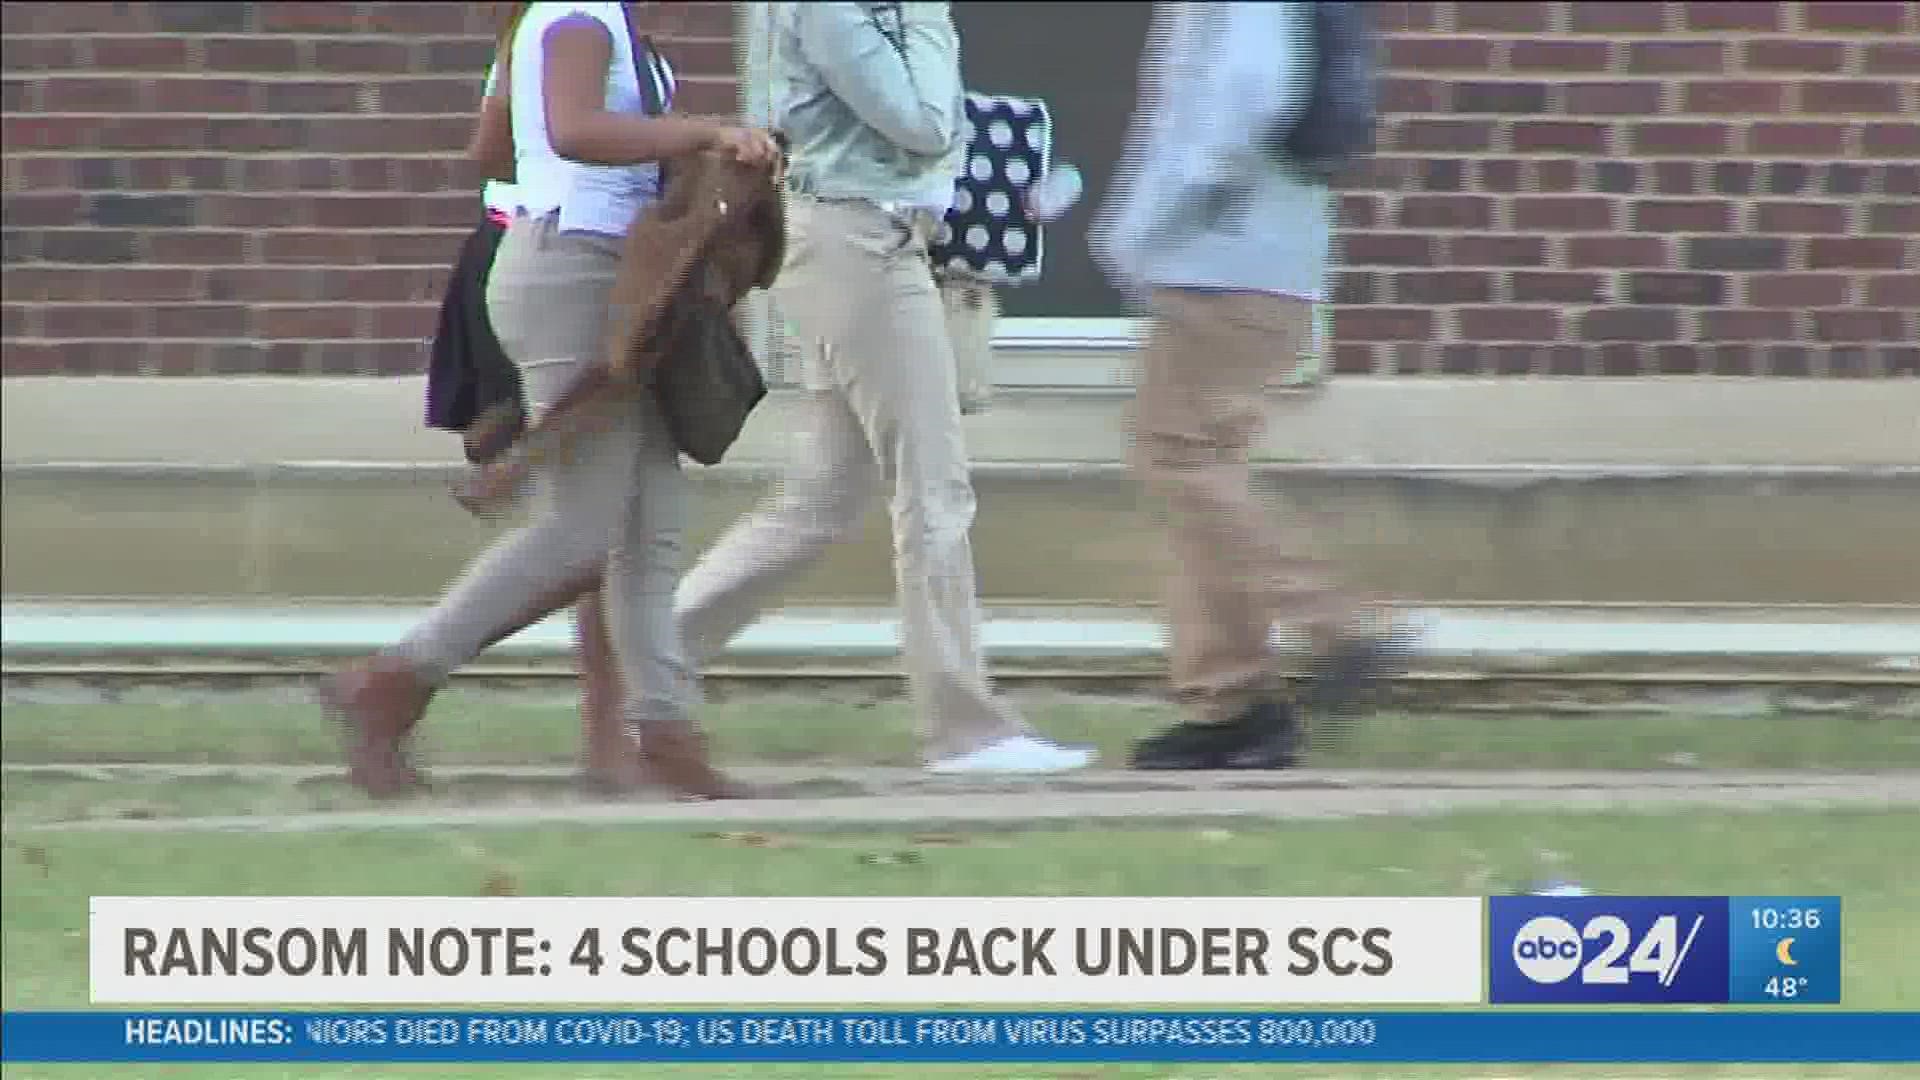 ABC24 Anchor Richard Ransom discusses in his Ransom Note about the 4 elementary schools returning back to the SCS District from the Achievement School District